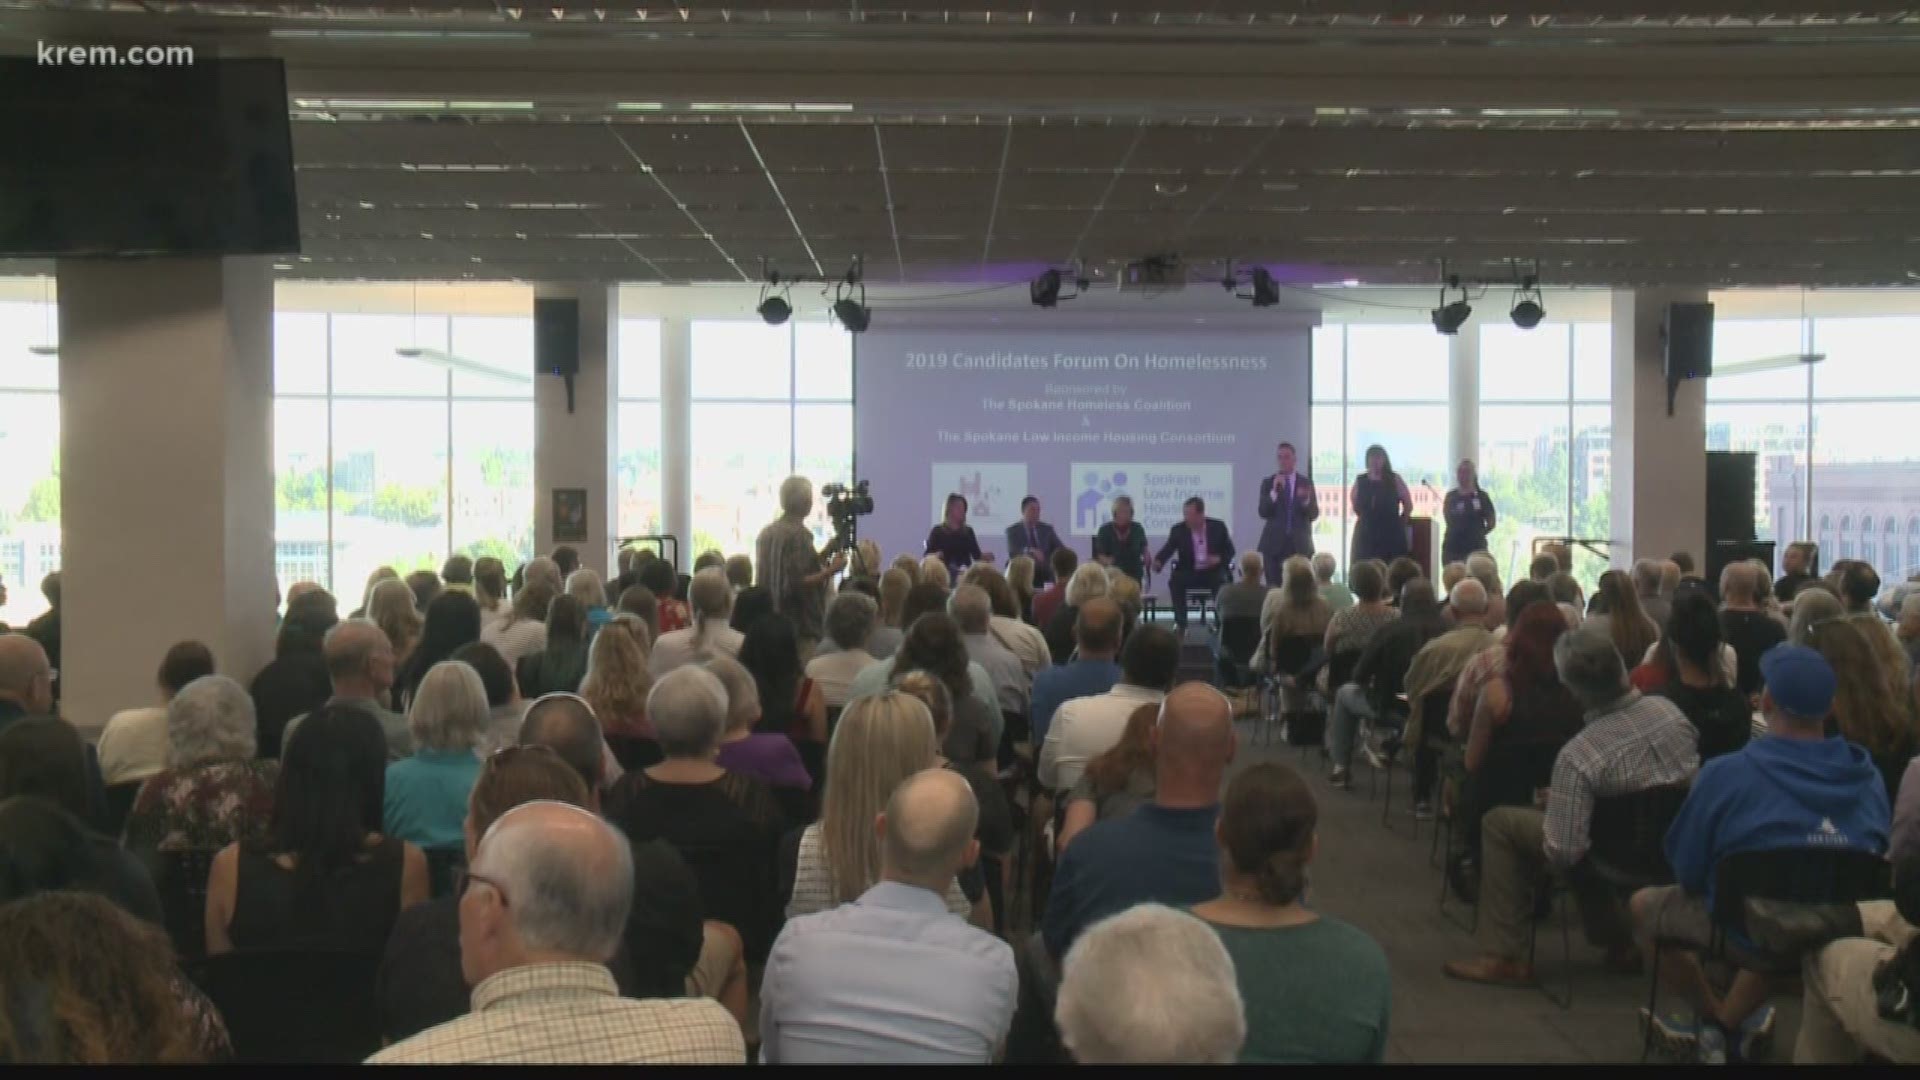 The candidates faced audience questions on issues relating to homelessness at the hour-and-a-half long forum at the downtown Spokane Public Library.